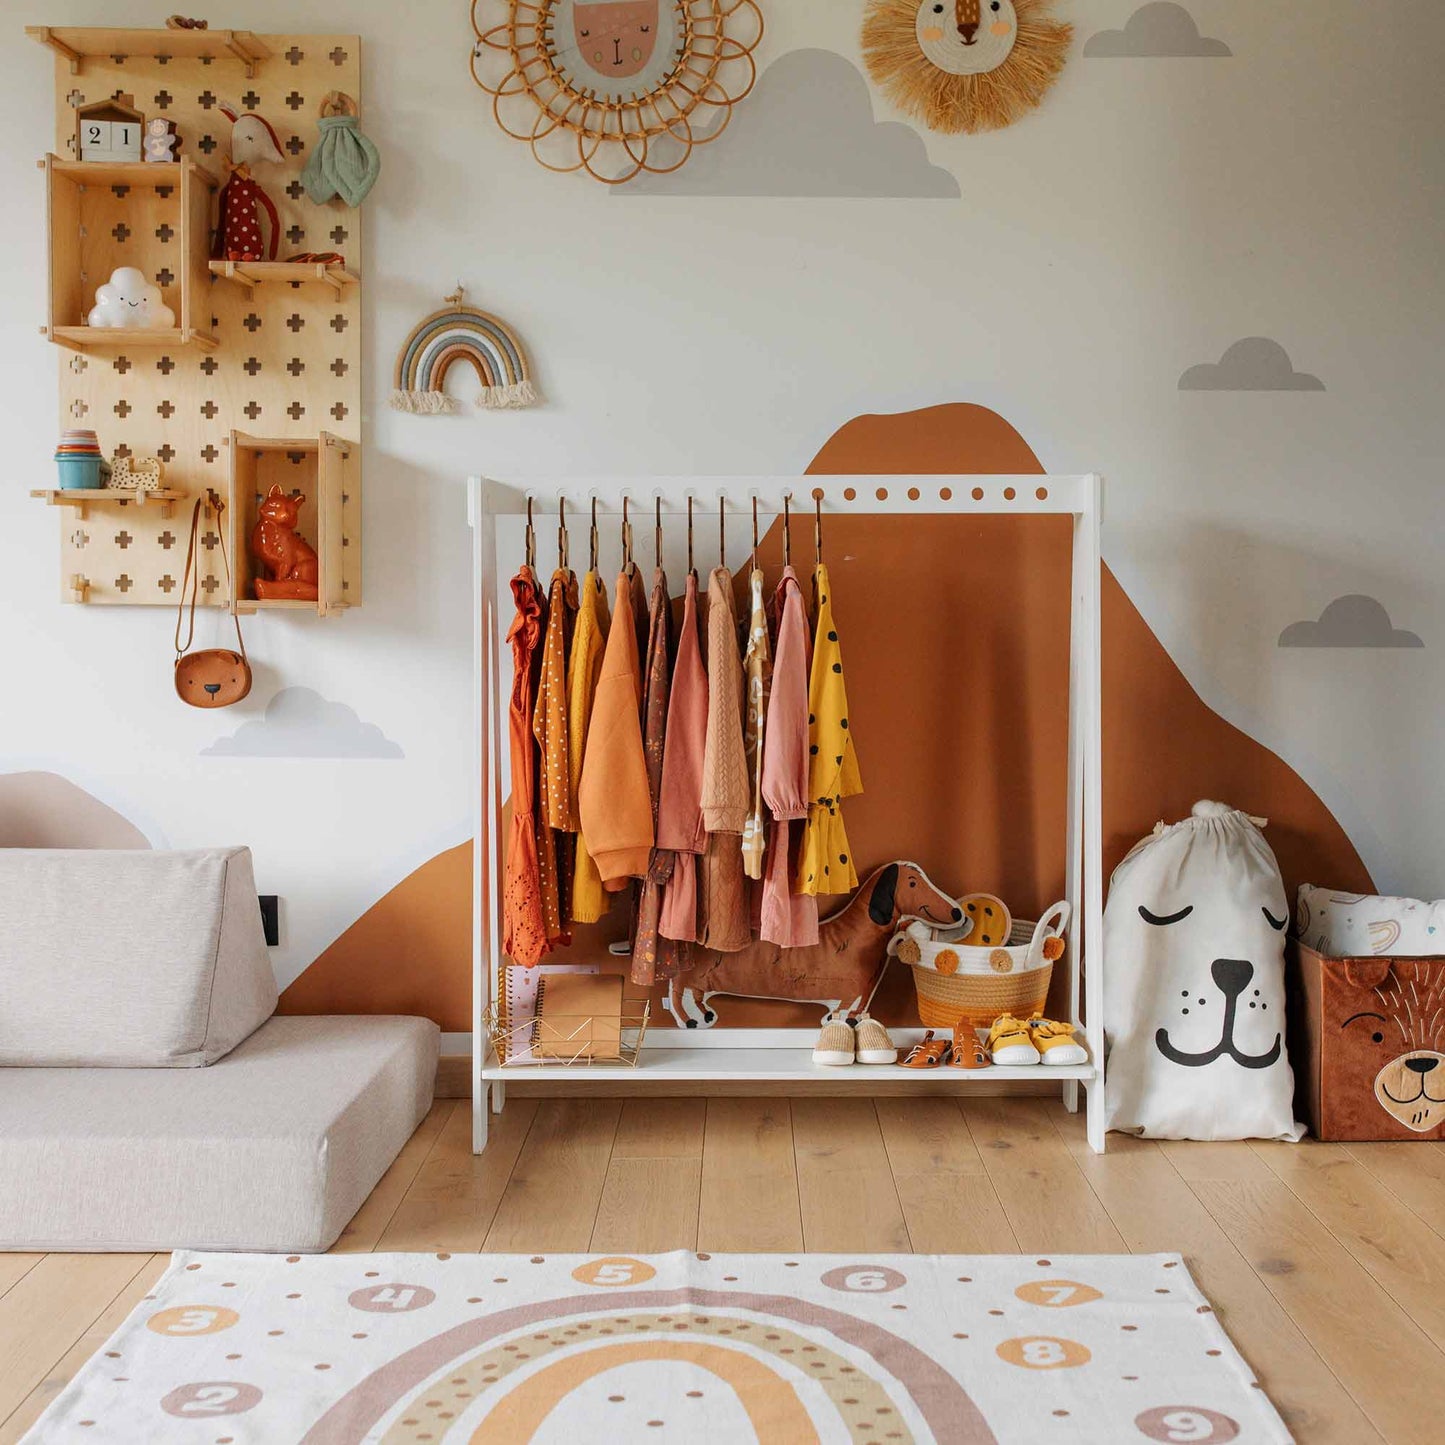 A children's room with an A-frame kids' clothing rack holding various kids' garments, animal-themed decor, a couch, and toy storage on a wooden floor. The wall features cloud and animal illustrations.